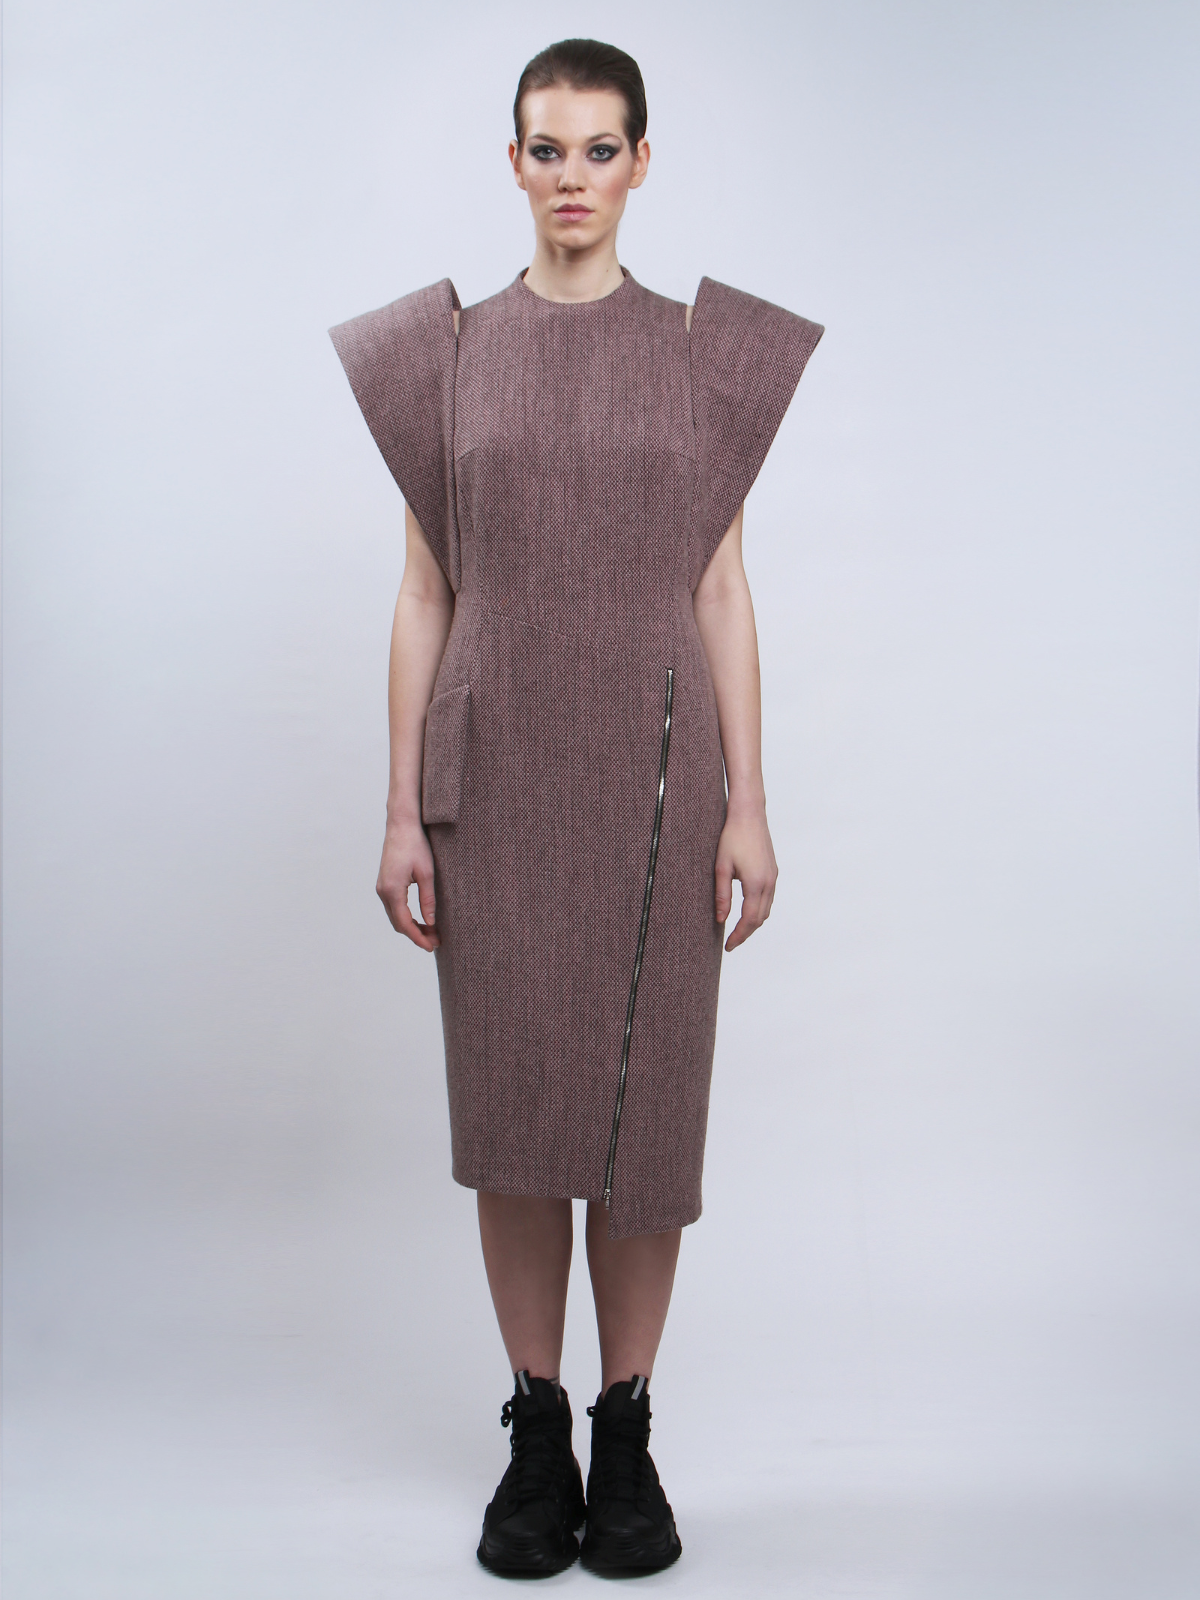 BICOLOUR RECYCLED WOOL DRESS